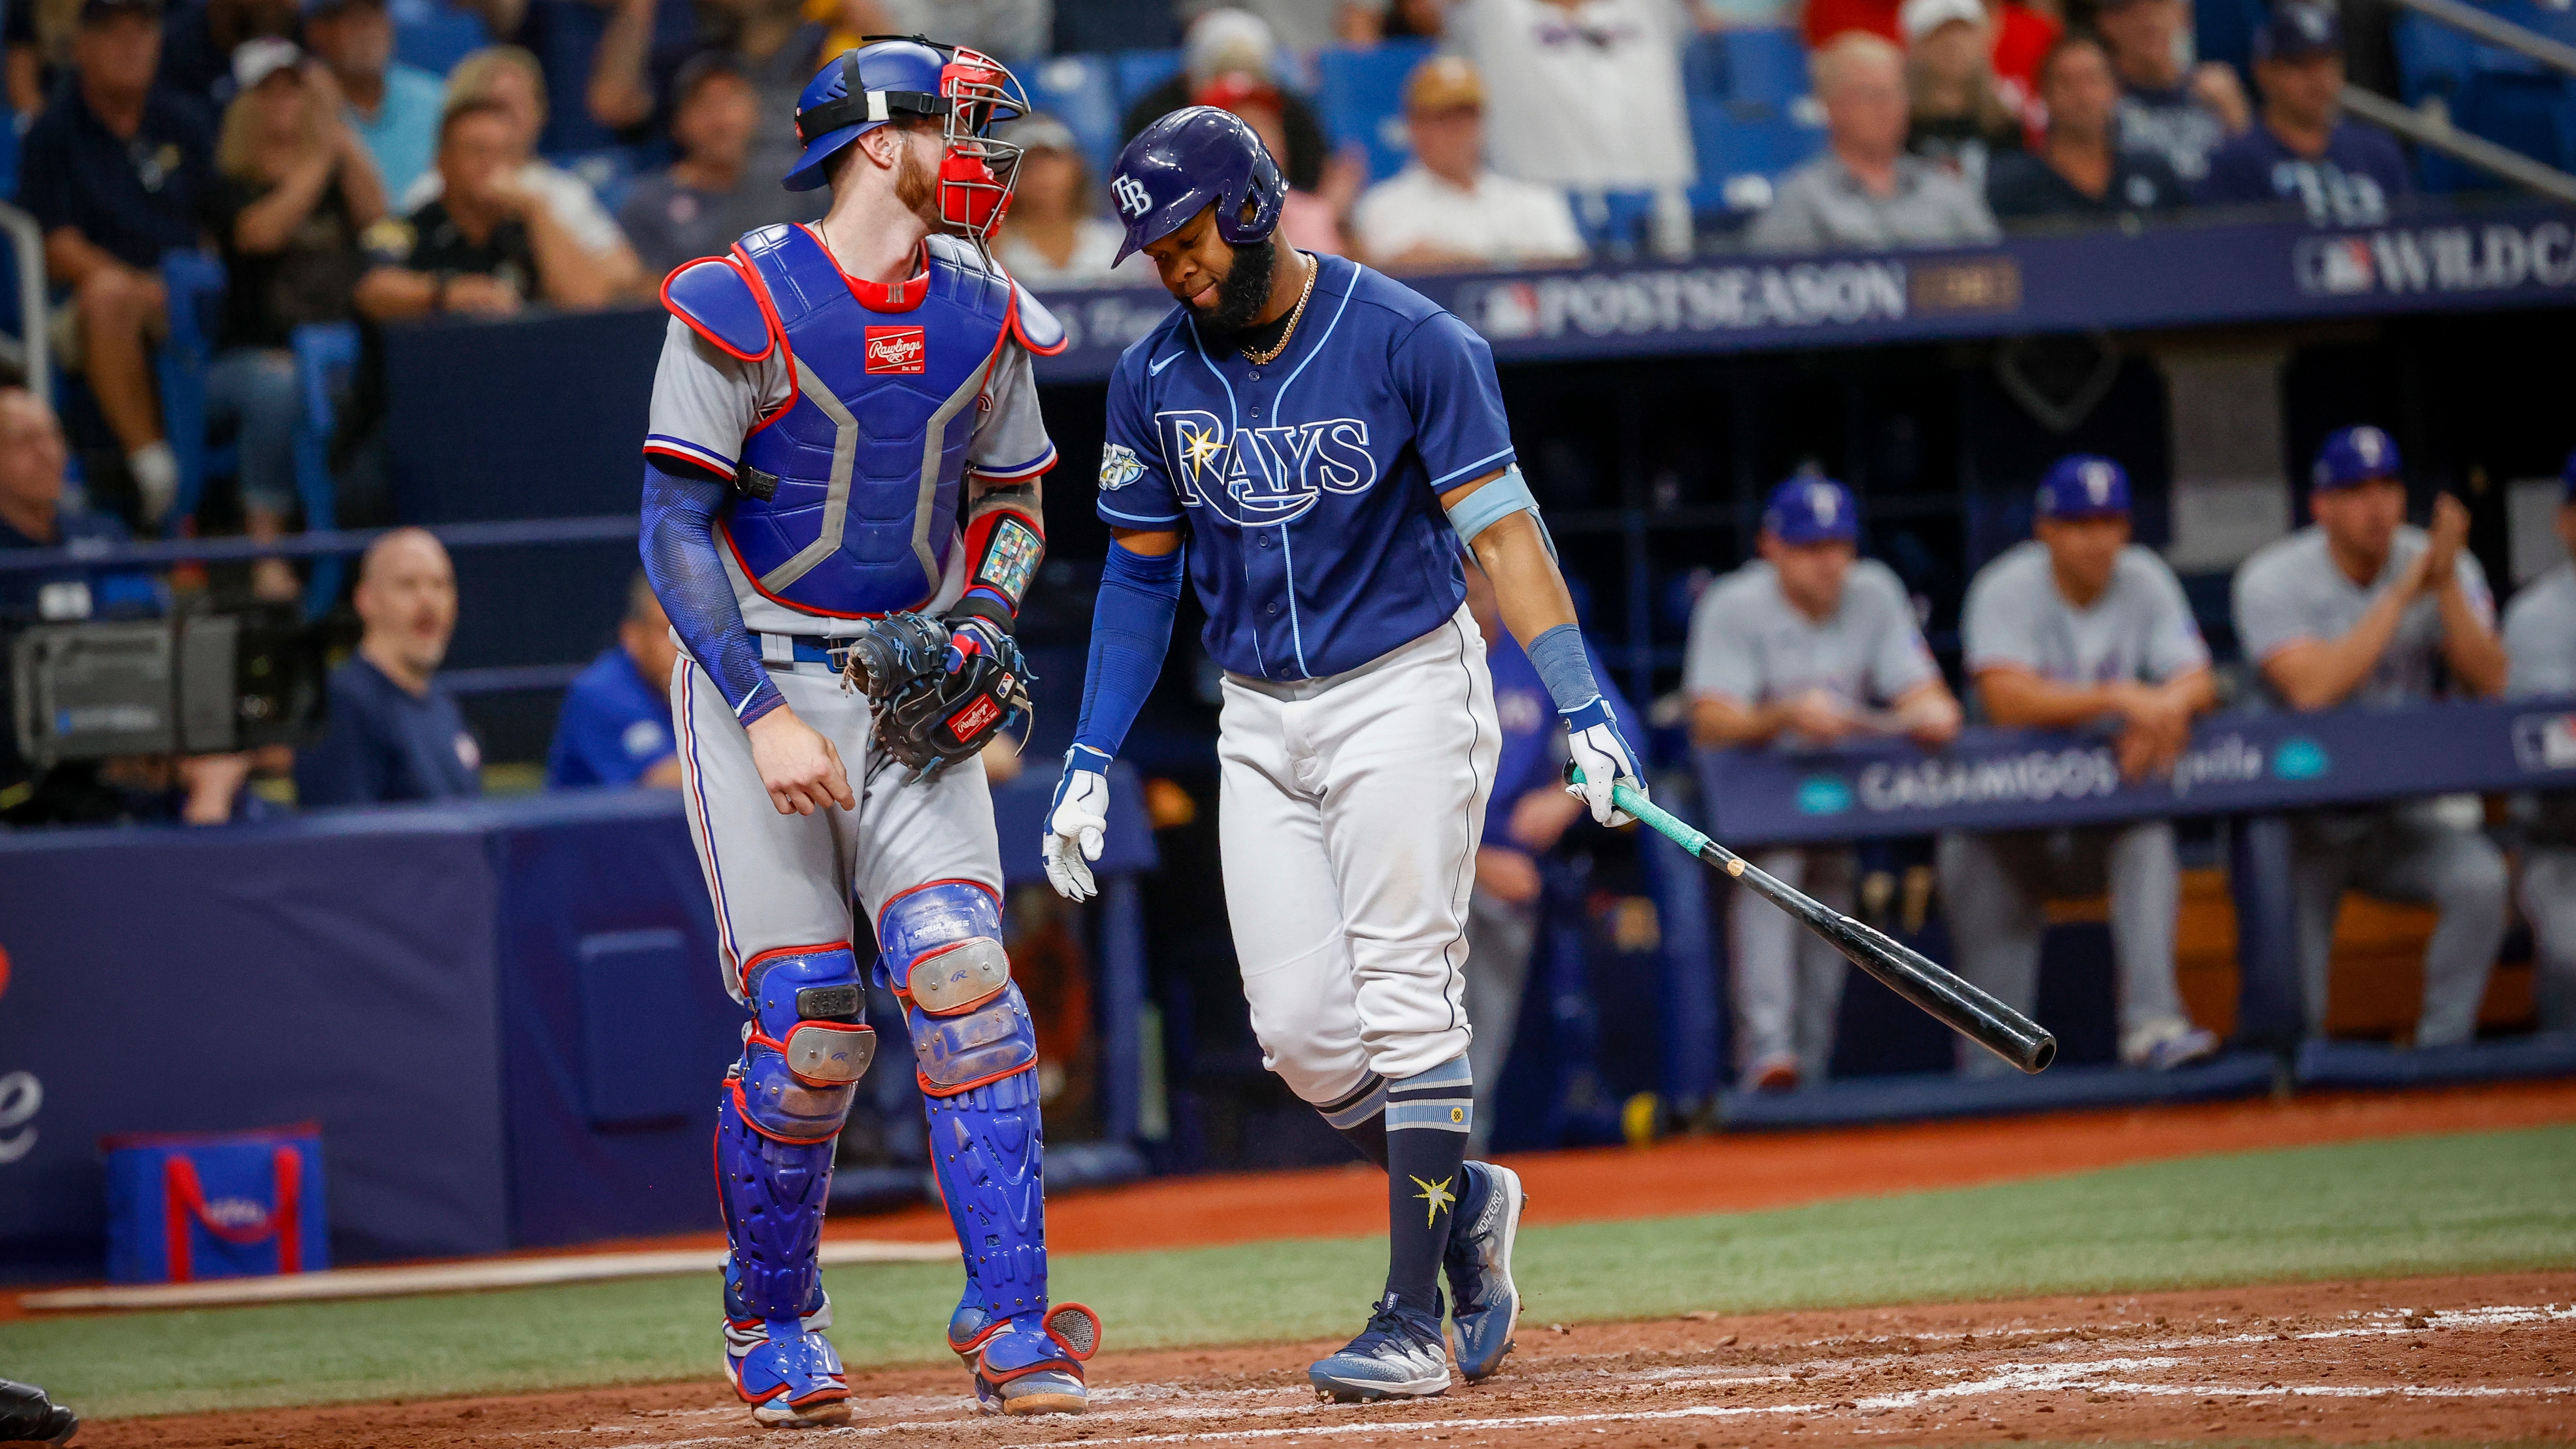 Blue Jays offence comes up short in Game 1 loss, continues regular